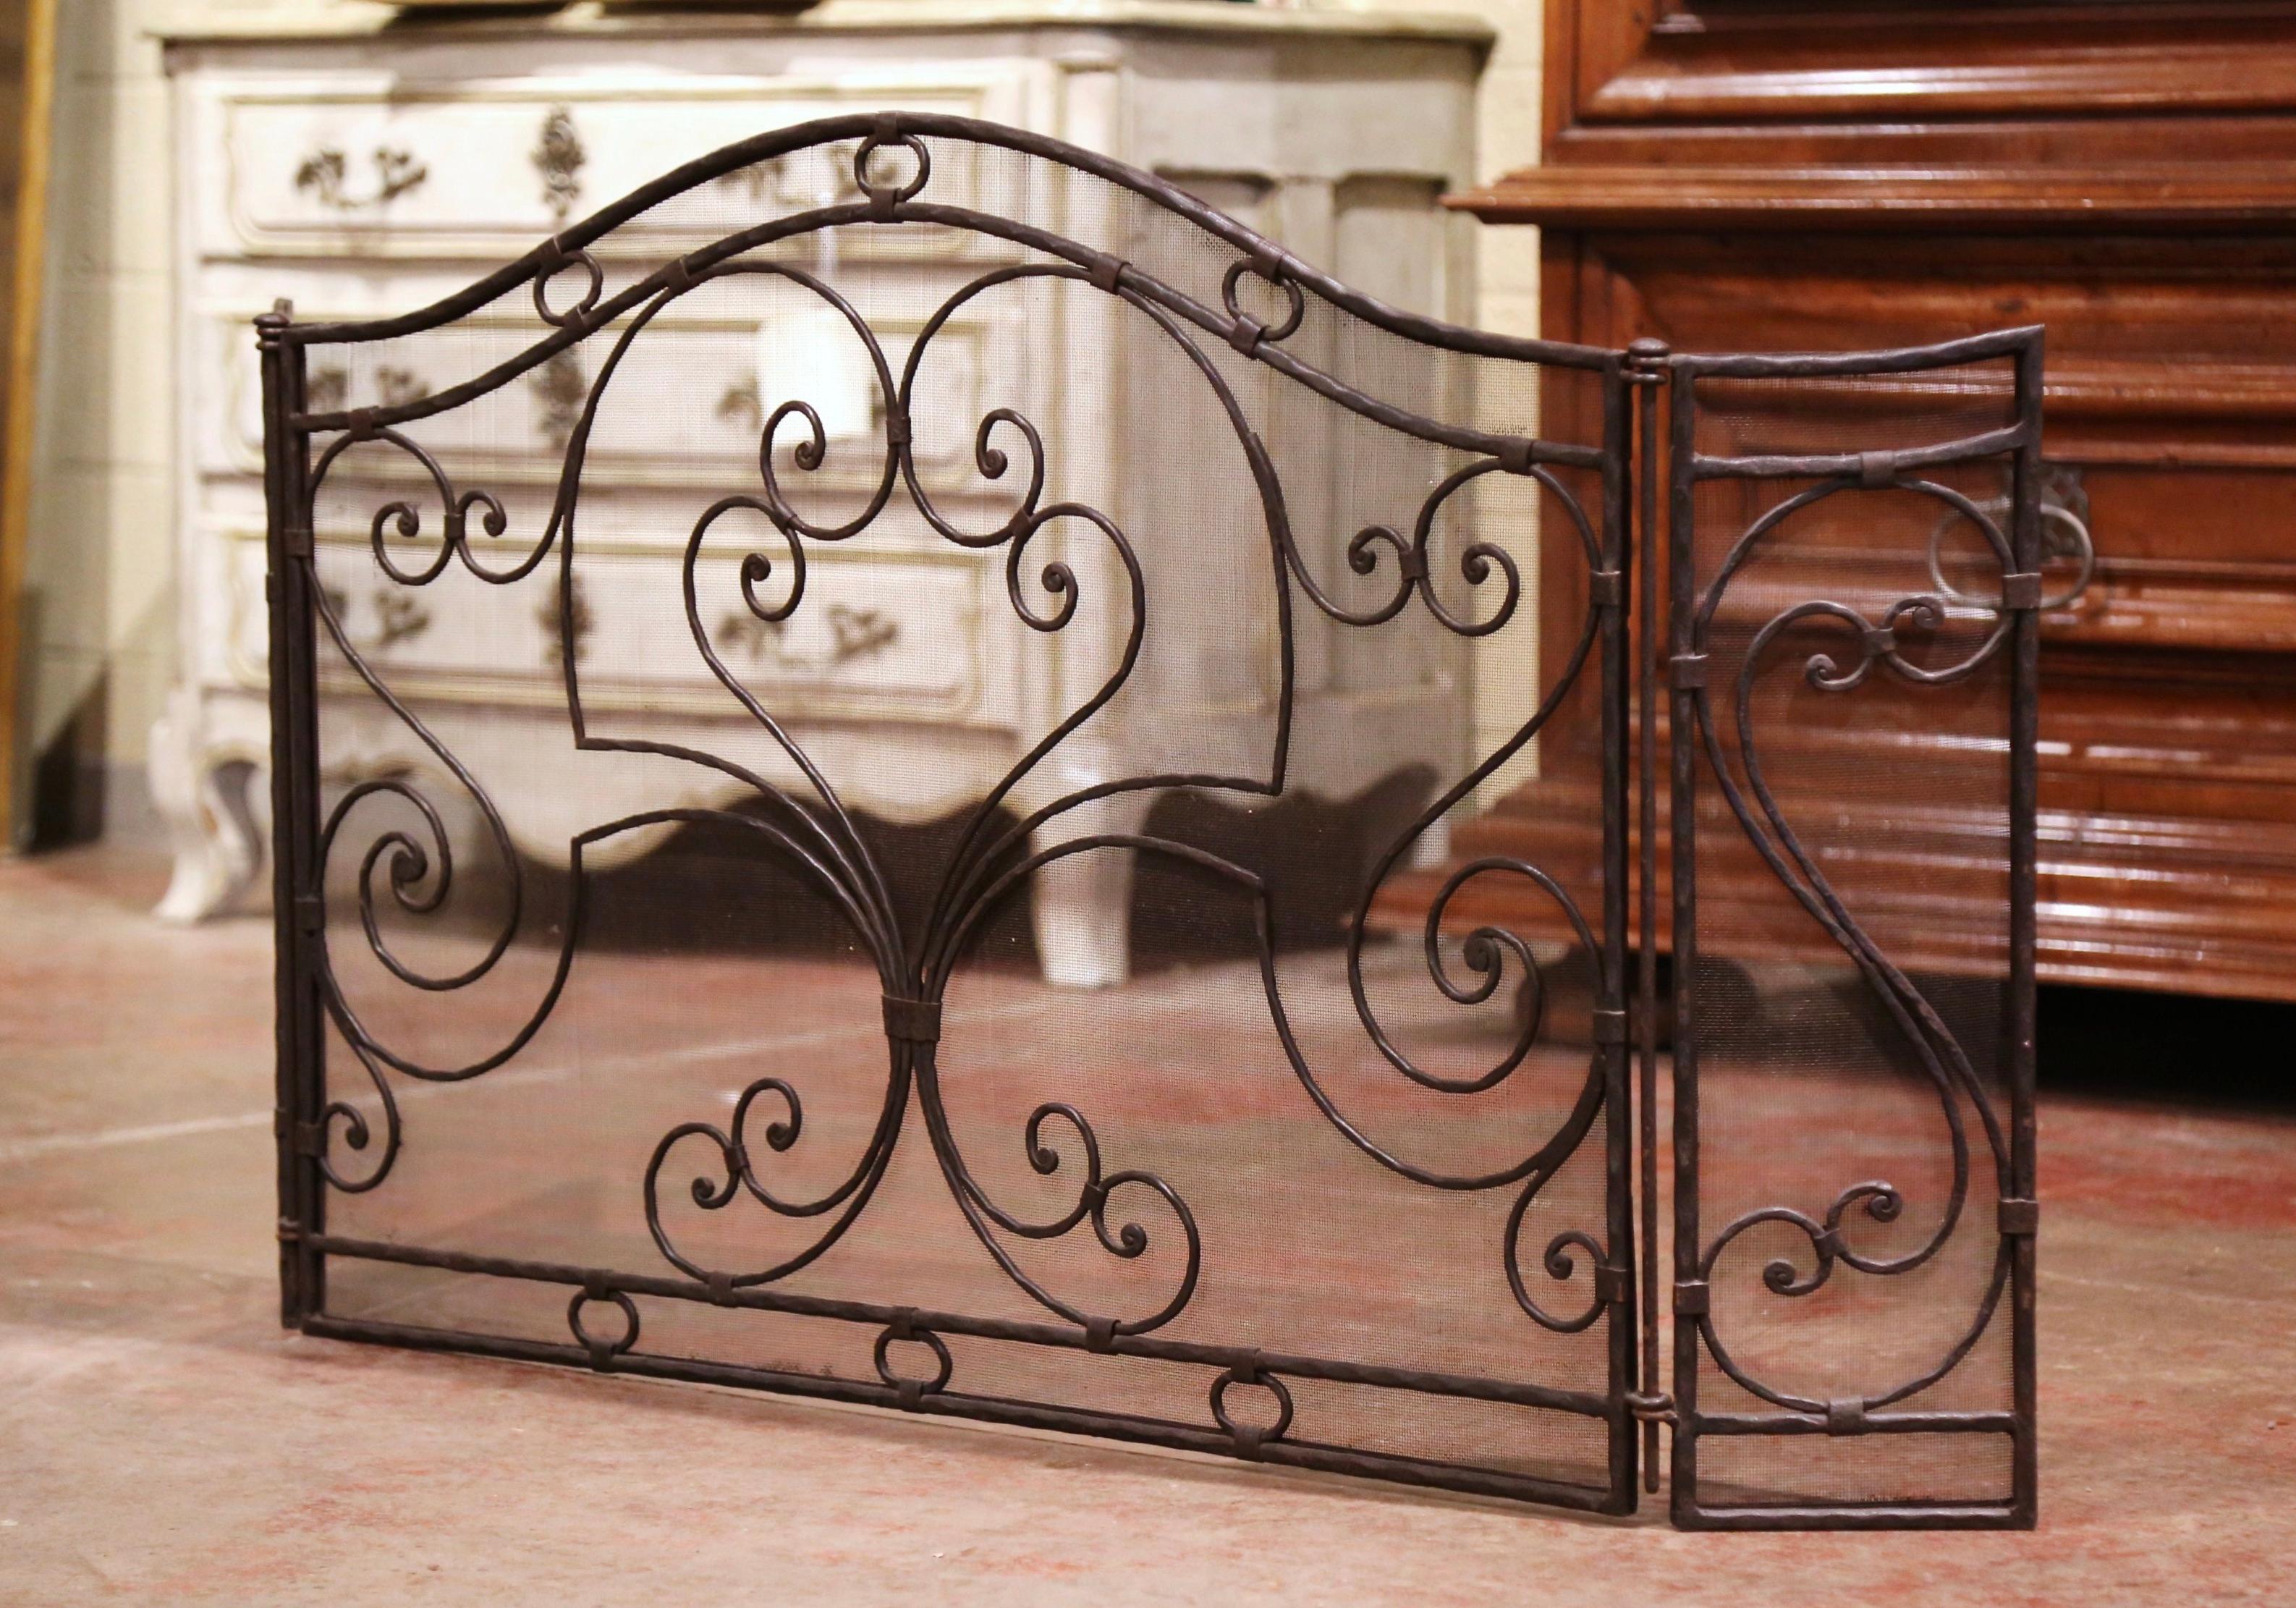 Decorate a fireplace hearth with this elegant arched screen. Forged in France, circa 1970, the freestanding hand forged screen features three panels with heavy scroll work decor; it is further embellished by a protective metal mesh screen on each